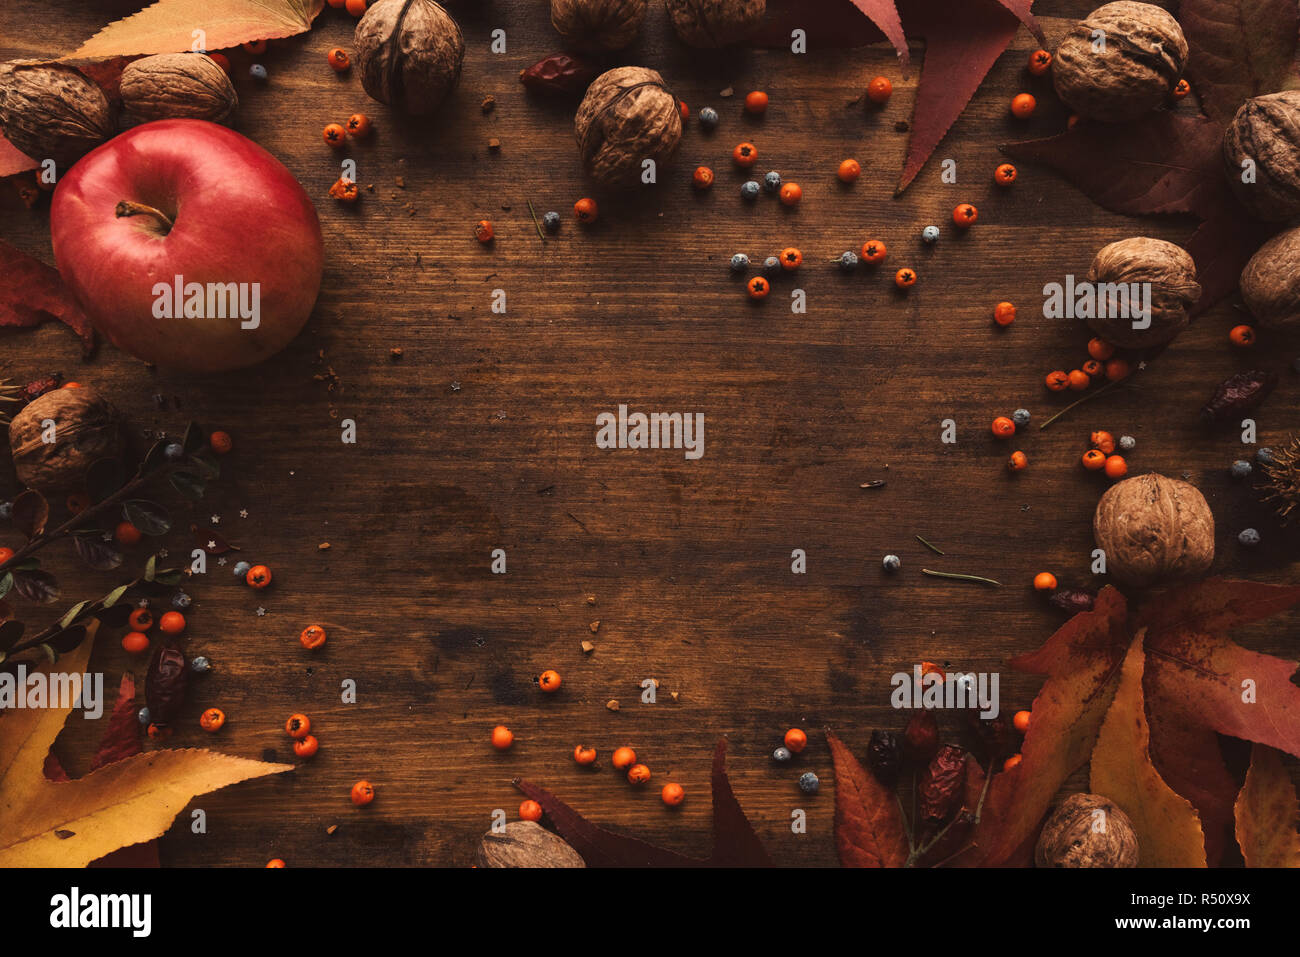 Autumn fruit, berries and leaves on wooden background. Flat lay top view with copy space. Stock Photo